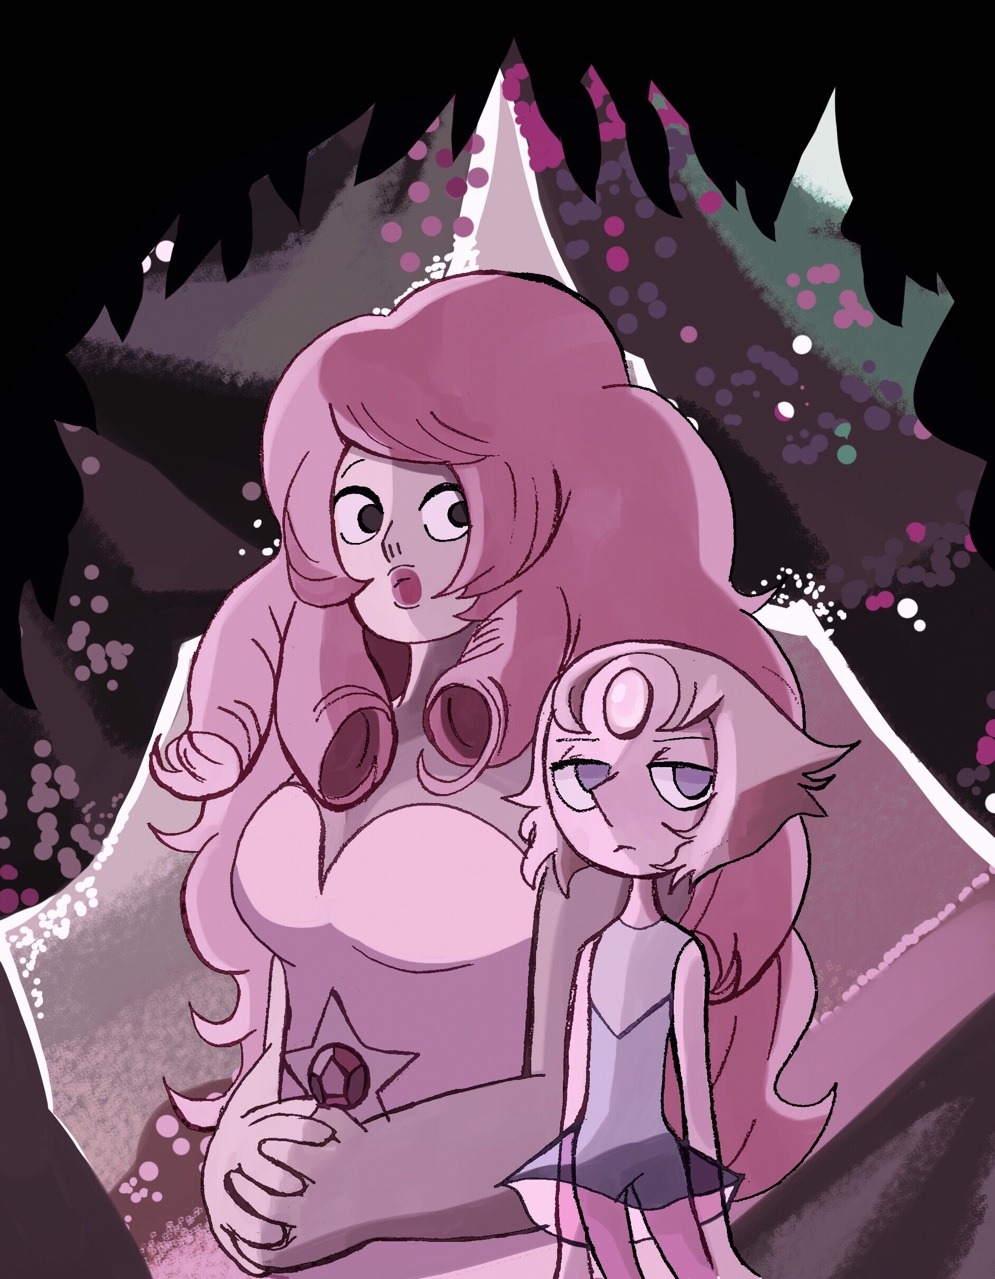 “And there they were: Rose Quartz, the leader of the rebellion, and her terrifying renegade Pearl.”